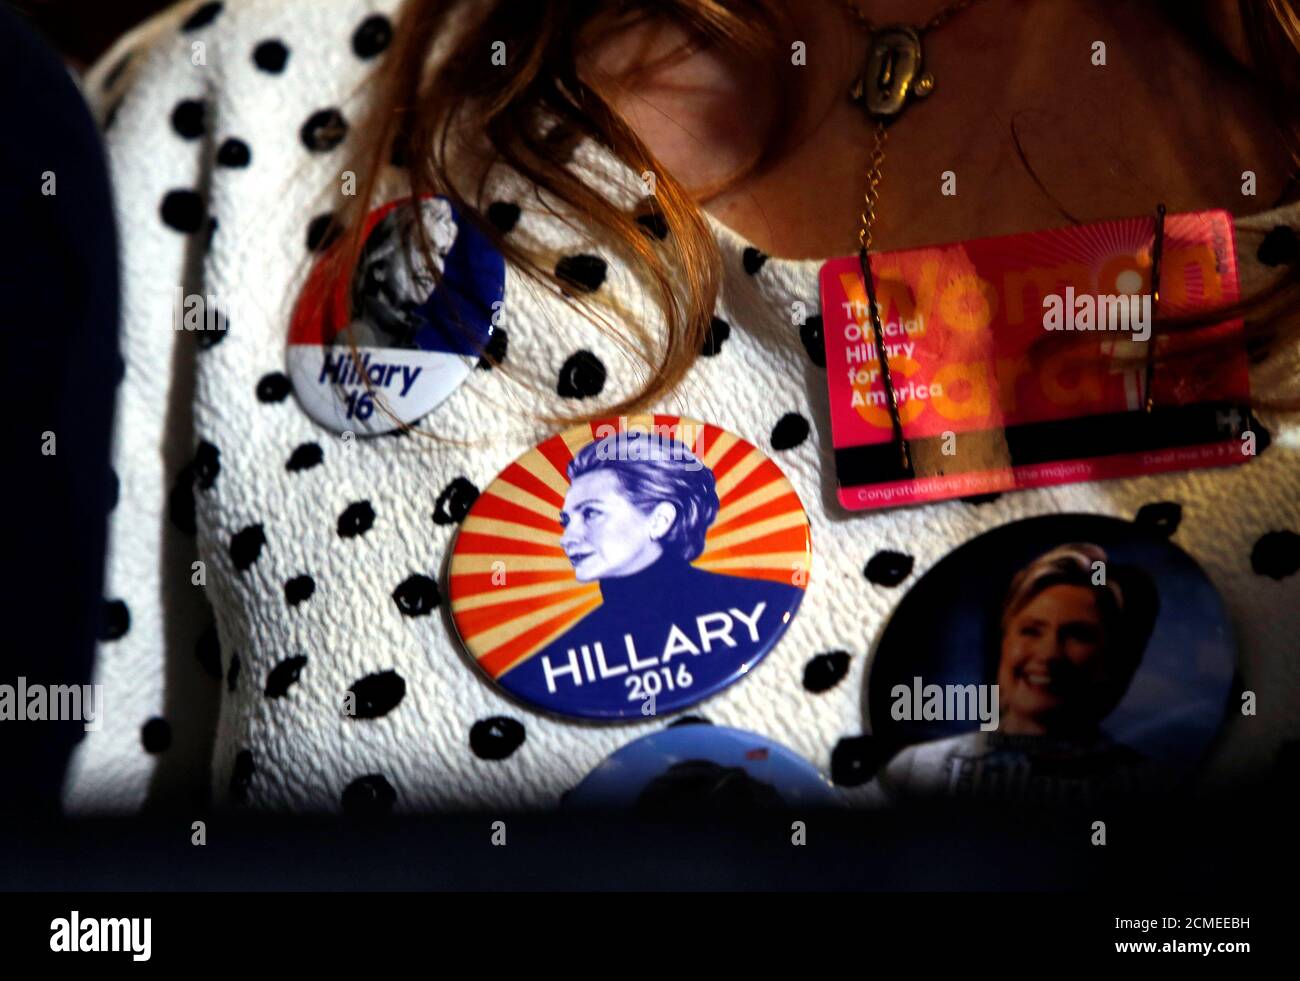 A supporter wears Democratic U.S. presidential nominee Hillary Clinton buttons during a Clinton campaign rally at the International Brotherhood of Electrical Workers (IBEW), Local 357, union hall in Las Vegas, Nevada, U.S., August 4, 2016. REUTERS/Steve Marcus Stock Photo